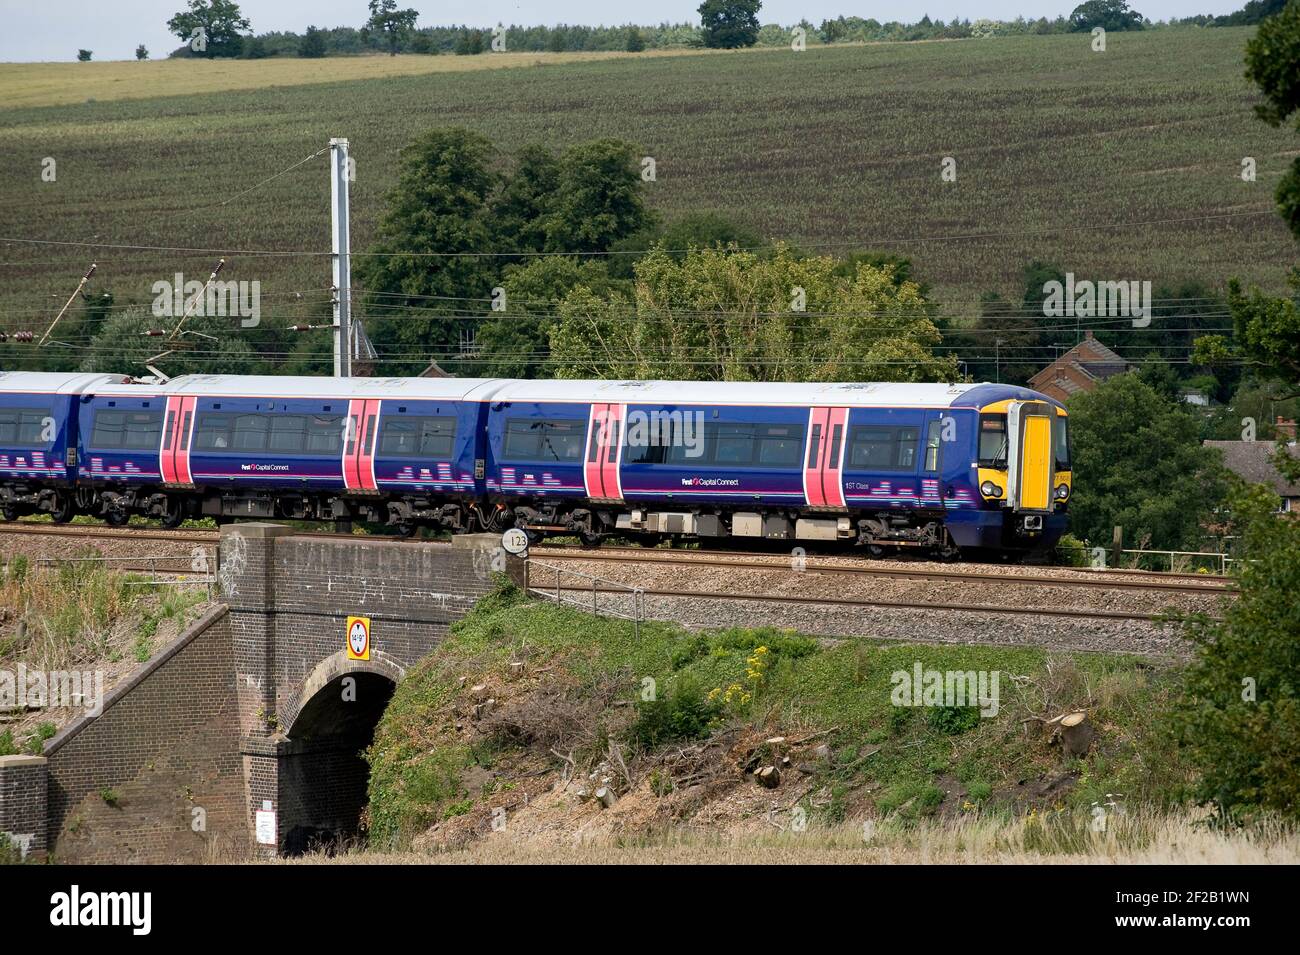 Class 377 passenger train in First Capital Connect livery speeding through the English countryside. Stock Photo